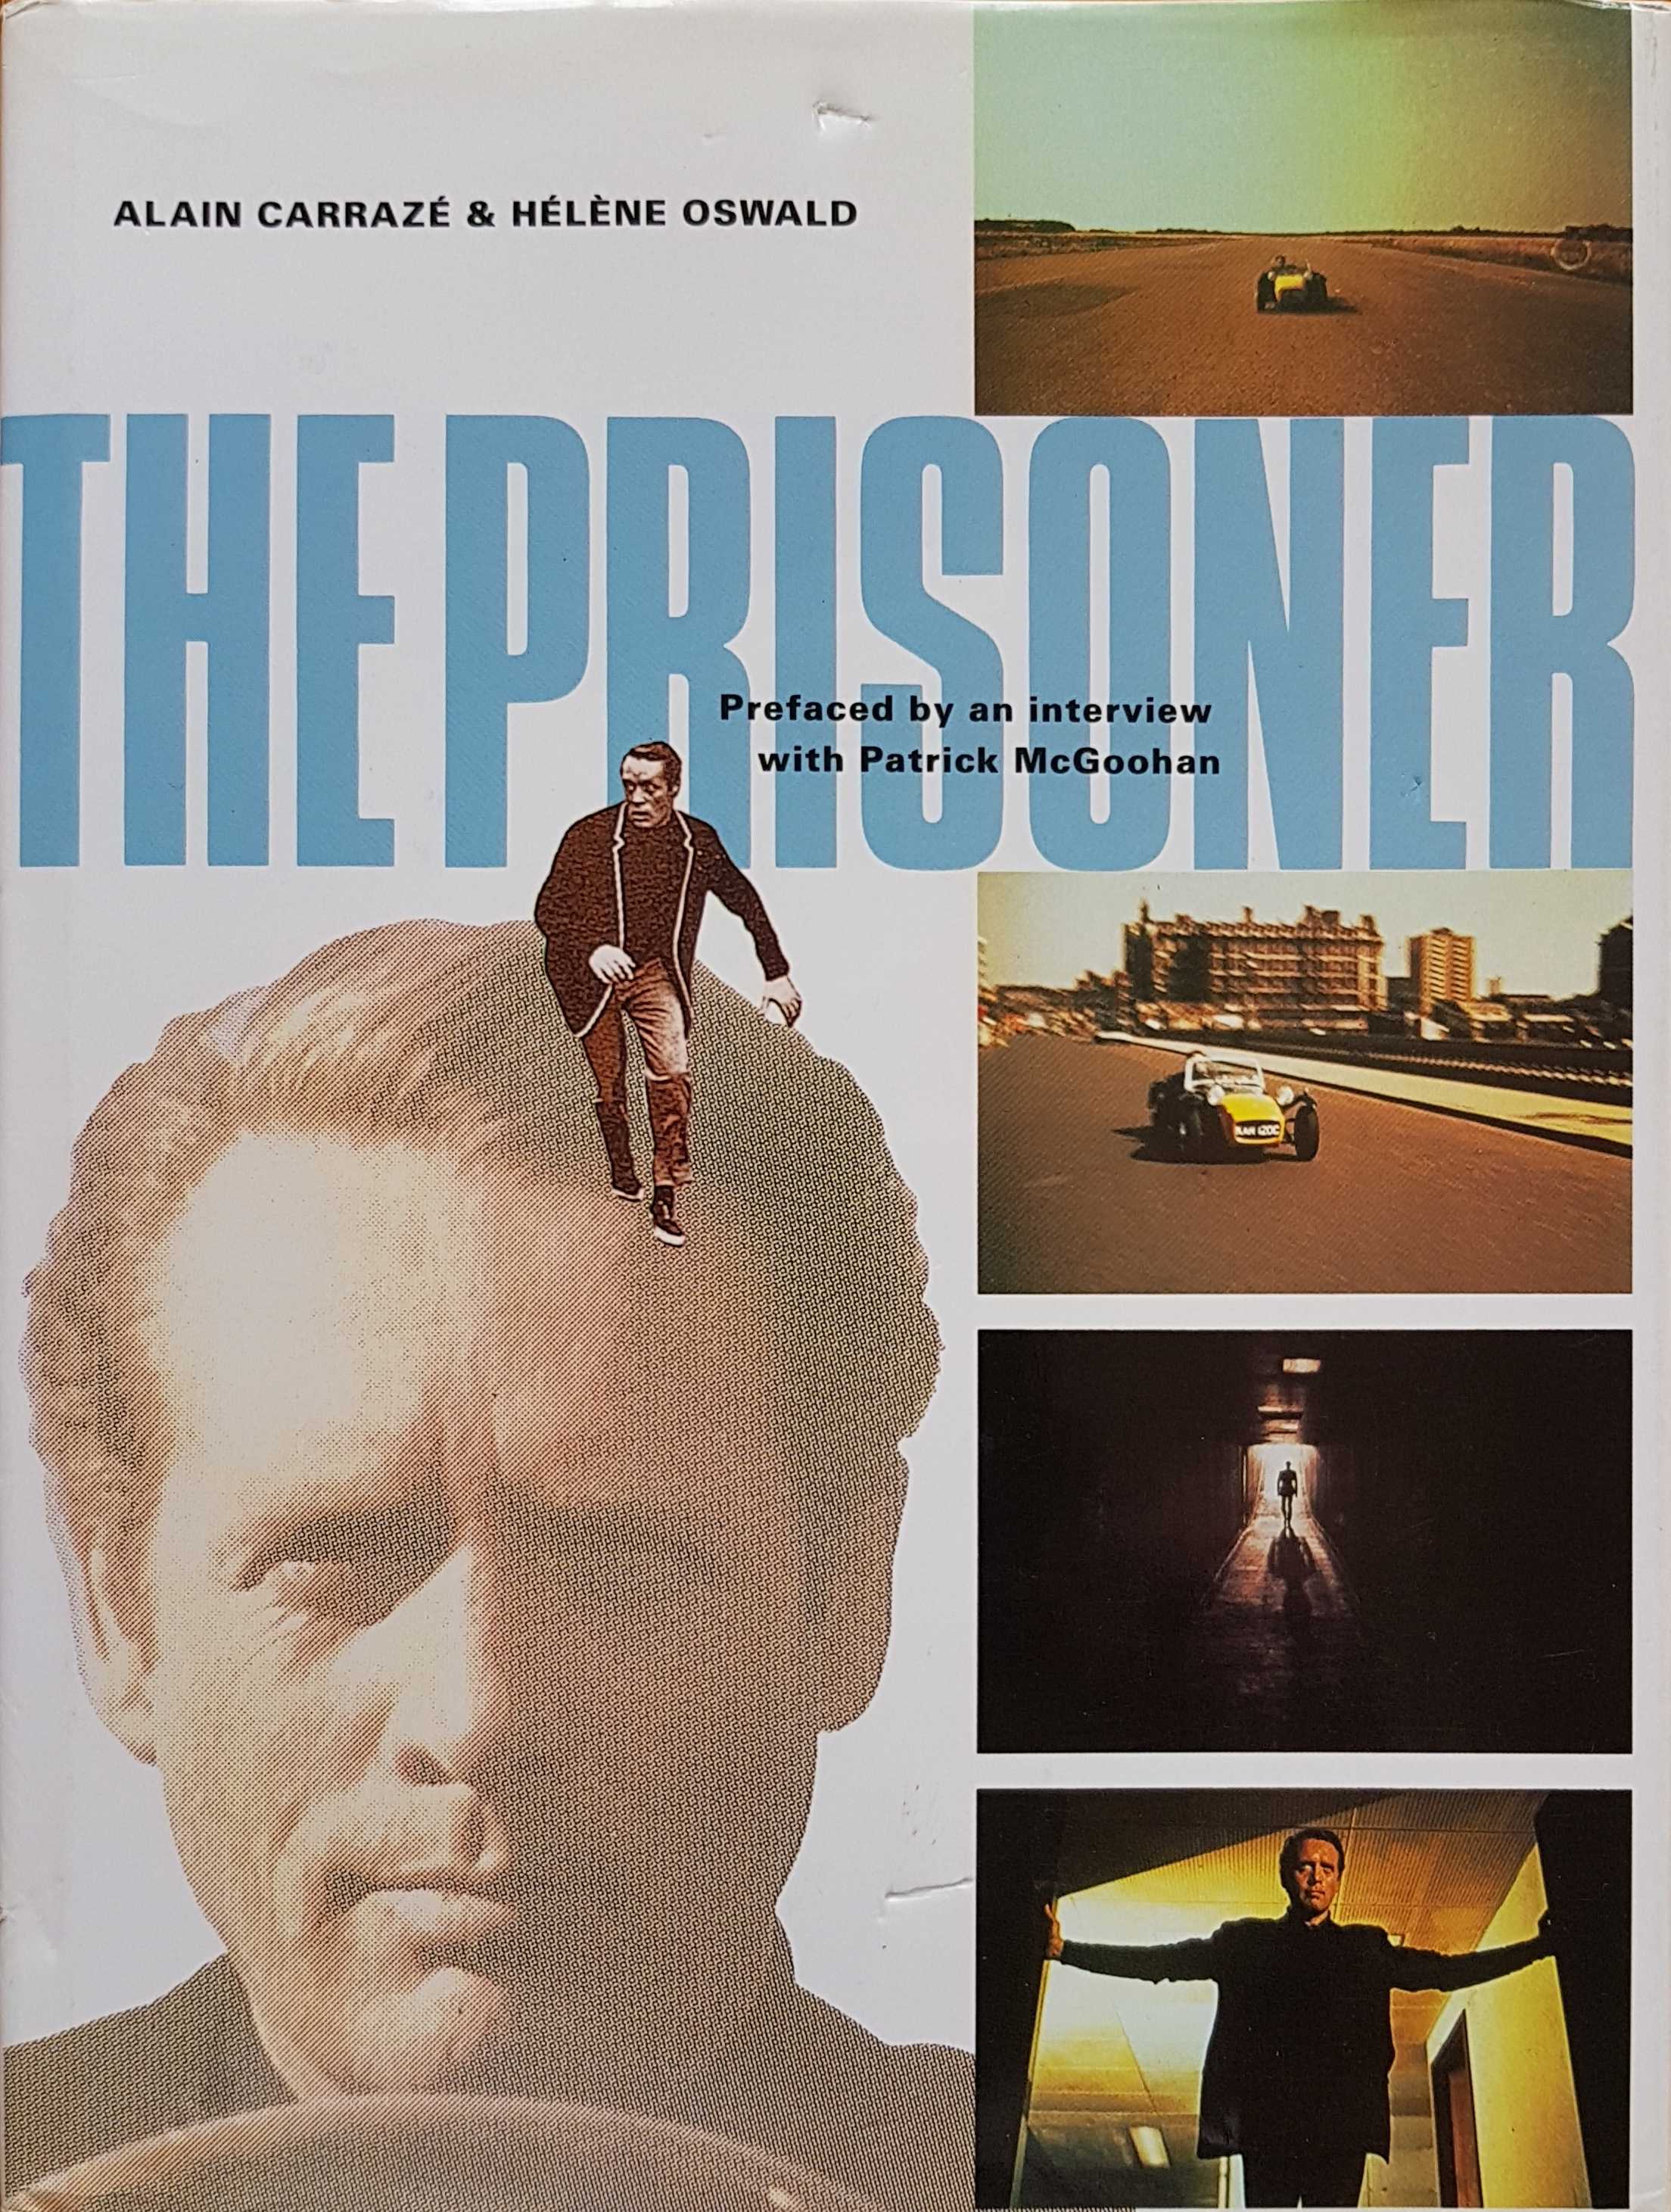 Picture of 1-85227-338-0 The prisoner by artist Alain Carraze / Helene Oswald from ITV, Channel 4 and Channel 5 books library